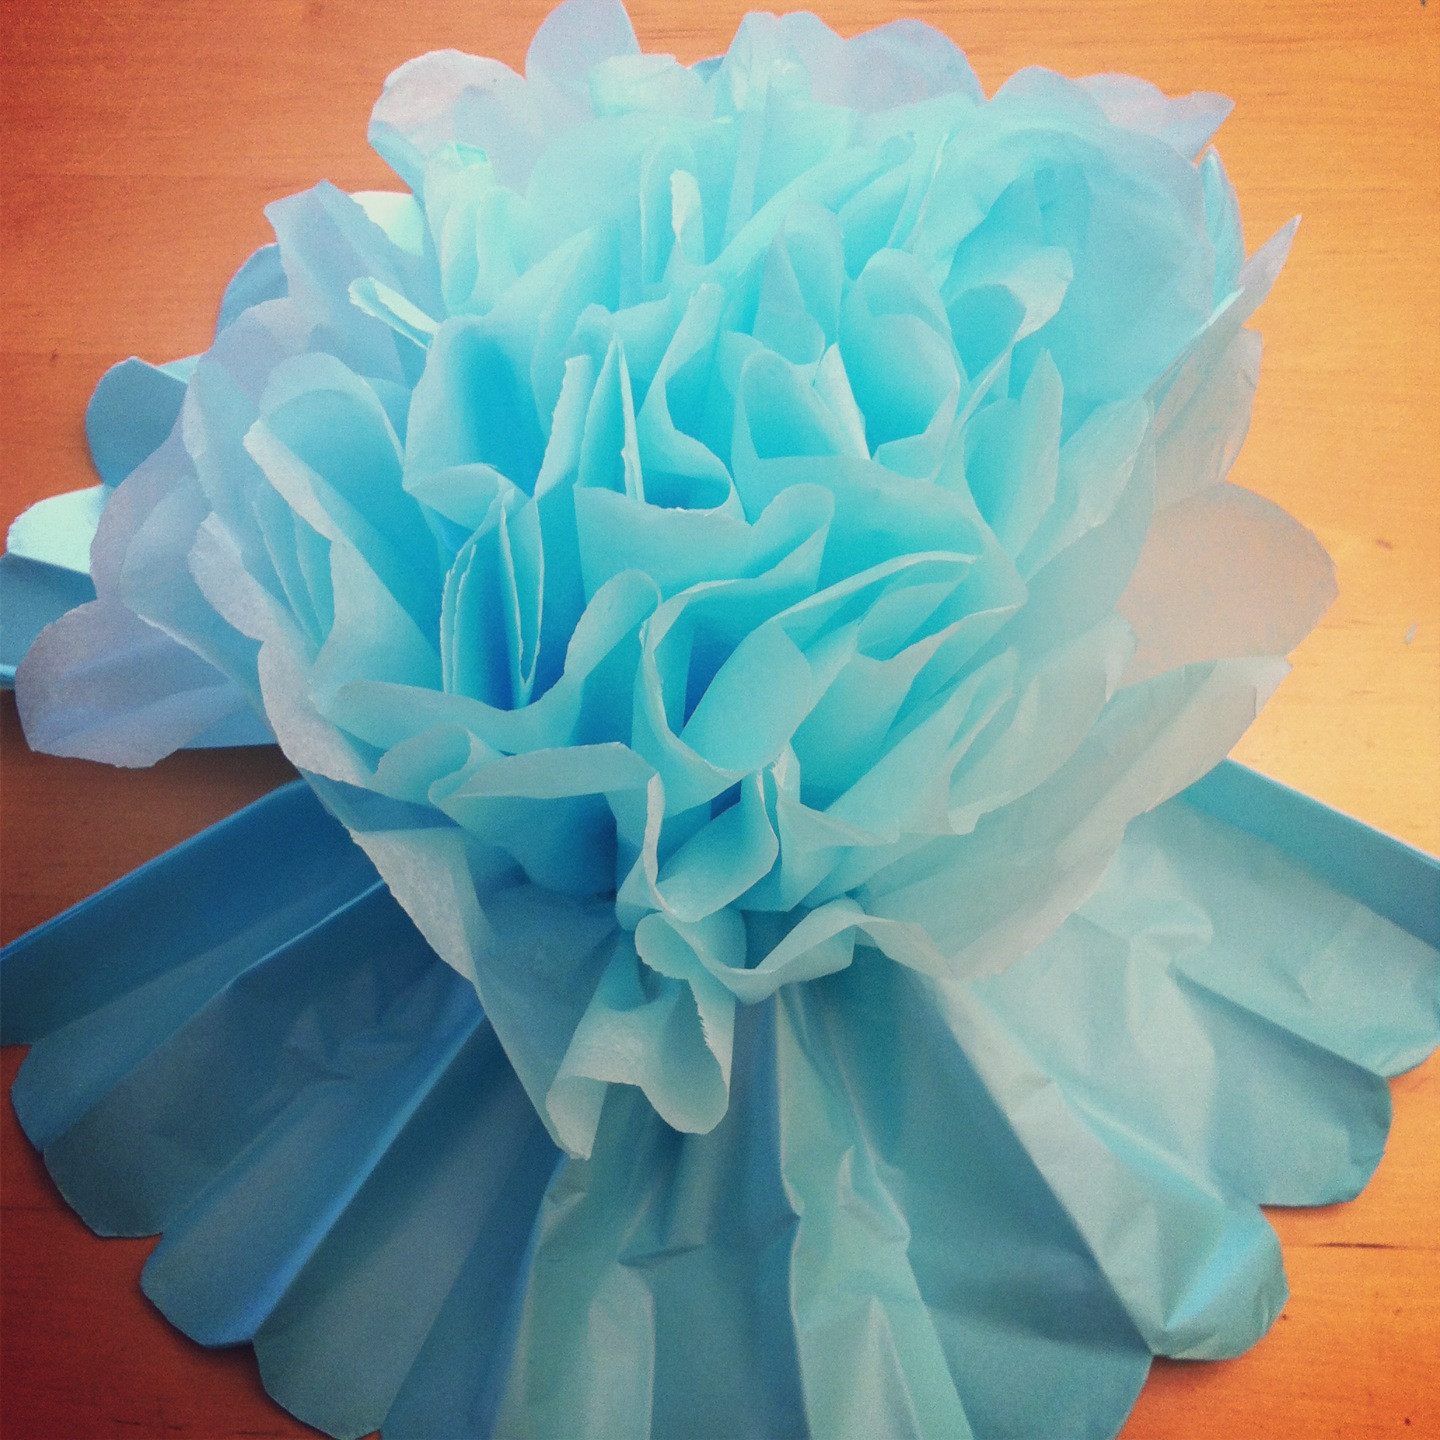 DIY Tissue Paper Decorations
 Tutorial How To Make DIY Giant Tissue Paper Flowers